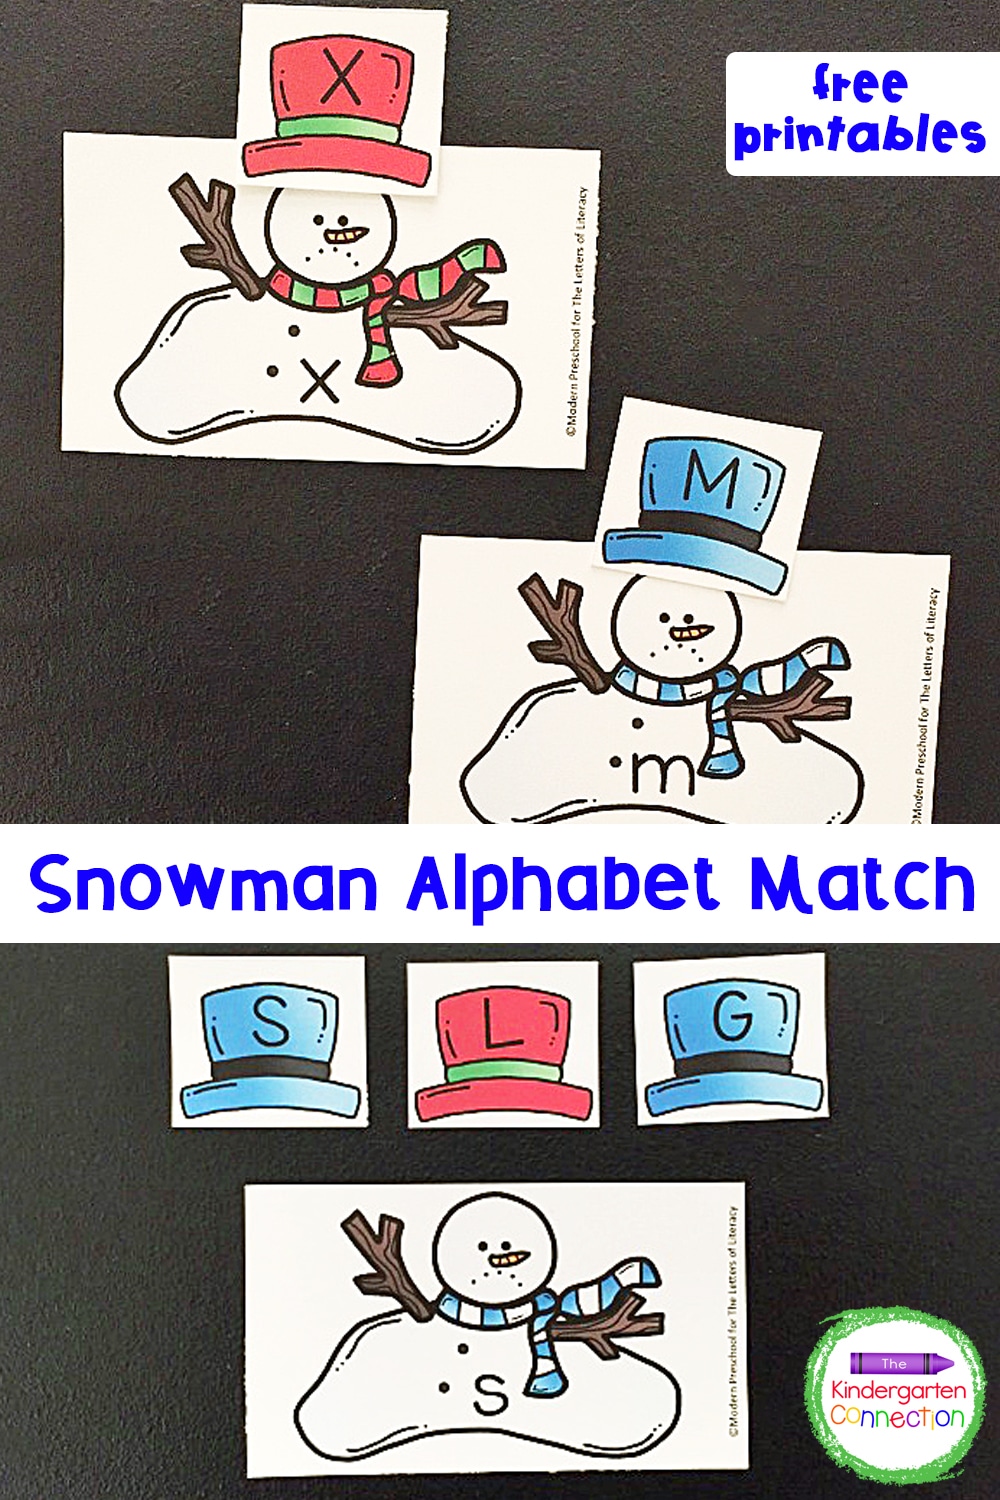 Work on letter matching with these alphabet match melted snowman cards! Use them to practice uppercase and lowercase letters and alphabet recognition.